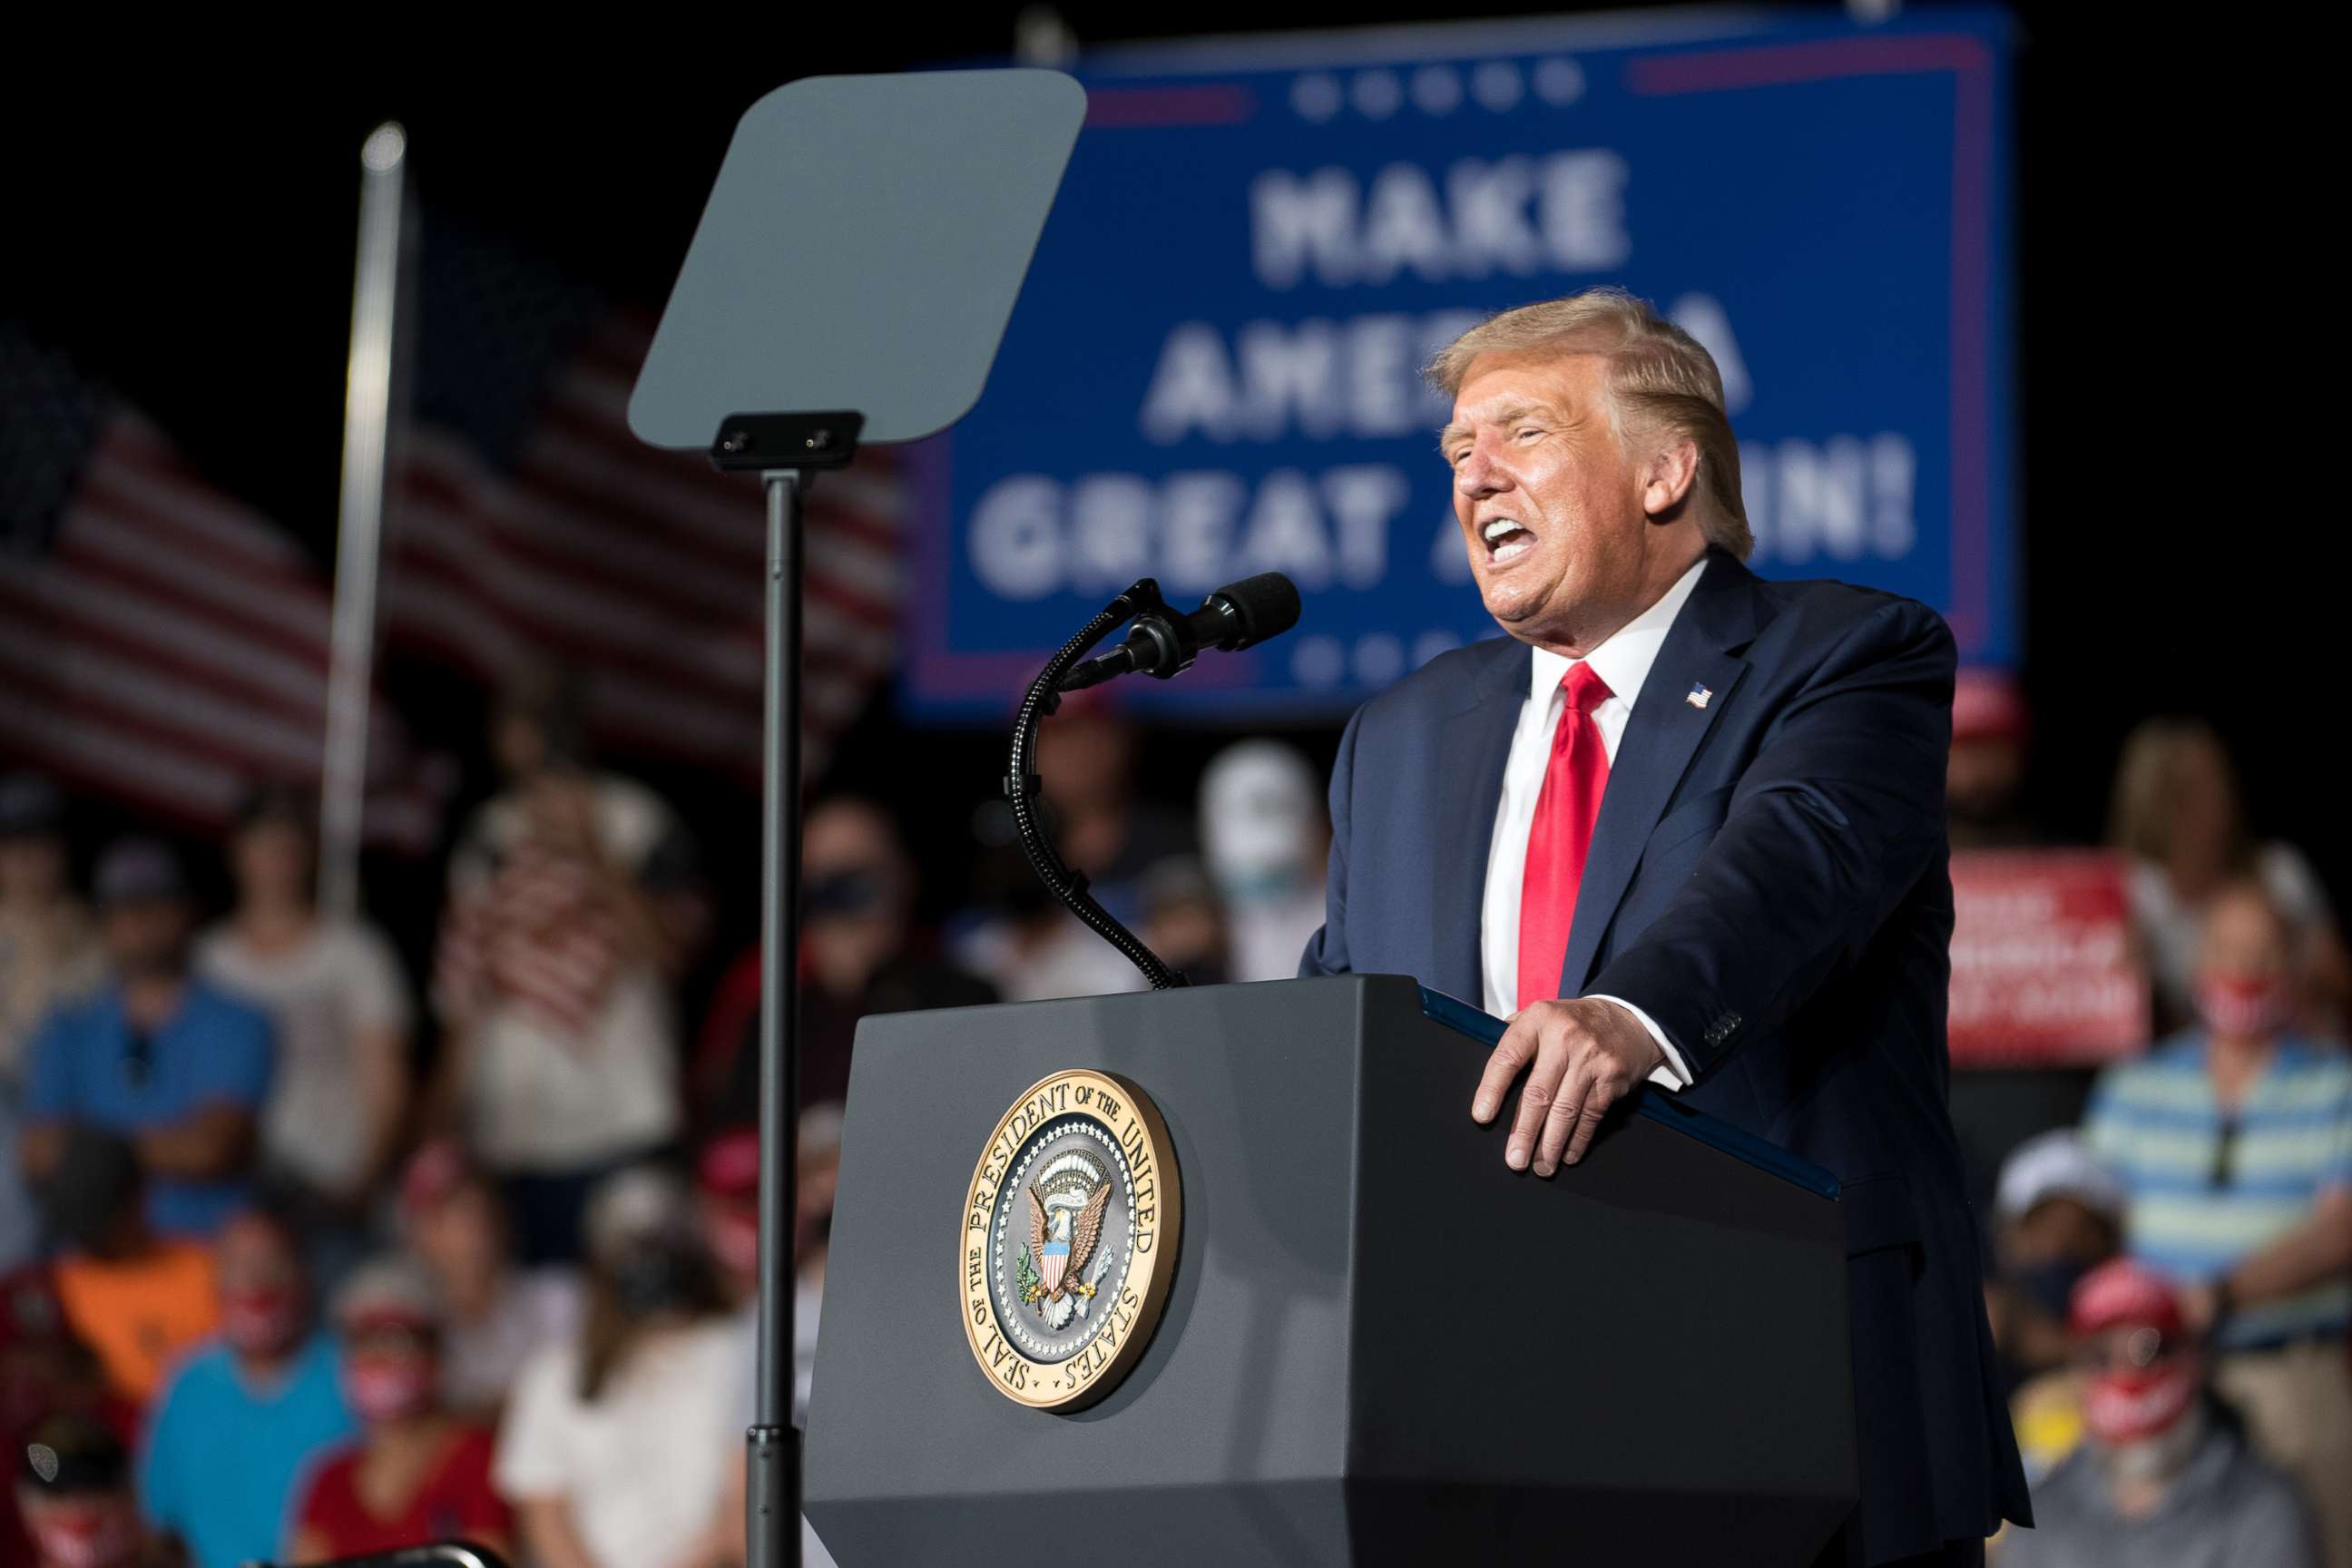 PHOTO: President Donald Trump addresses the crowd during a campaign rally at Smith Reynolds Airport on Sept. 8, 2020, in Winston Salem, NC.